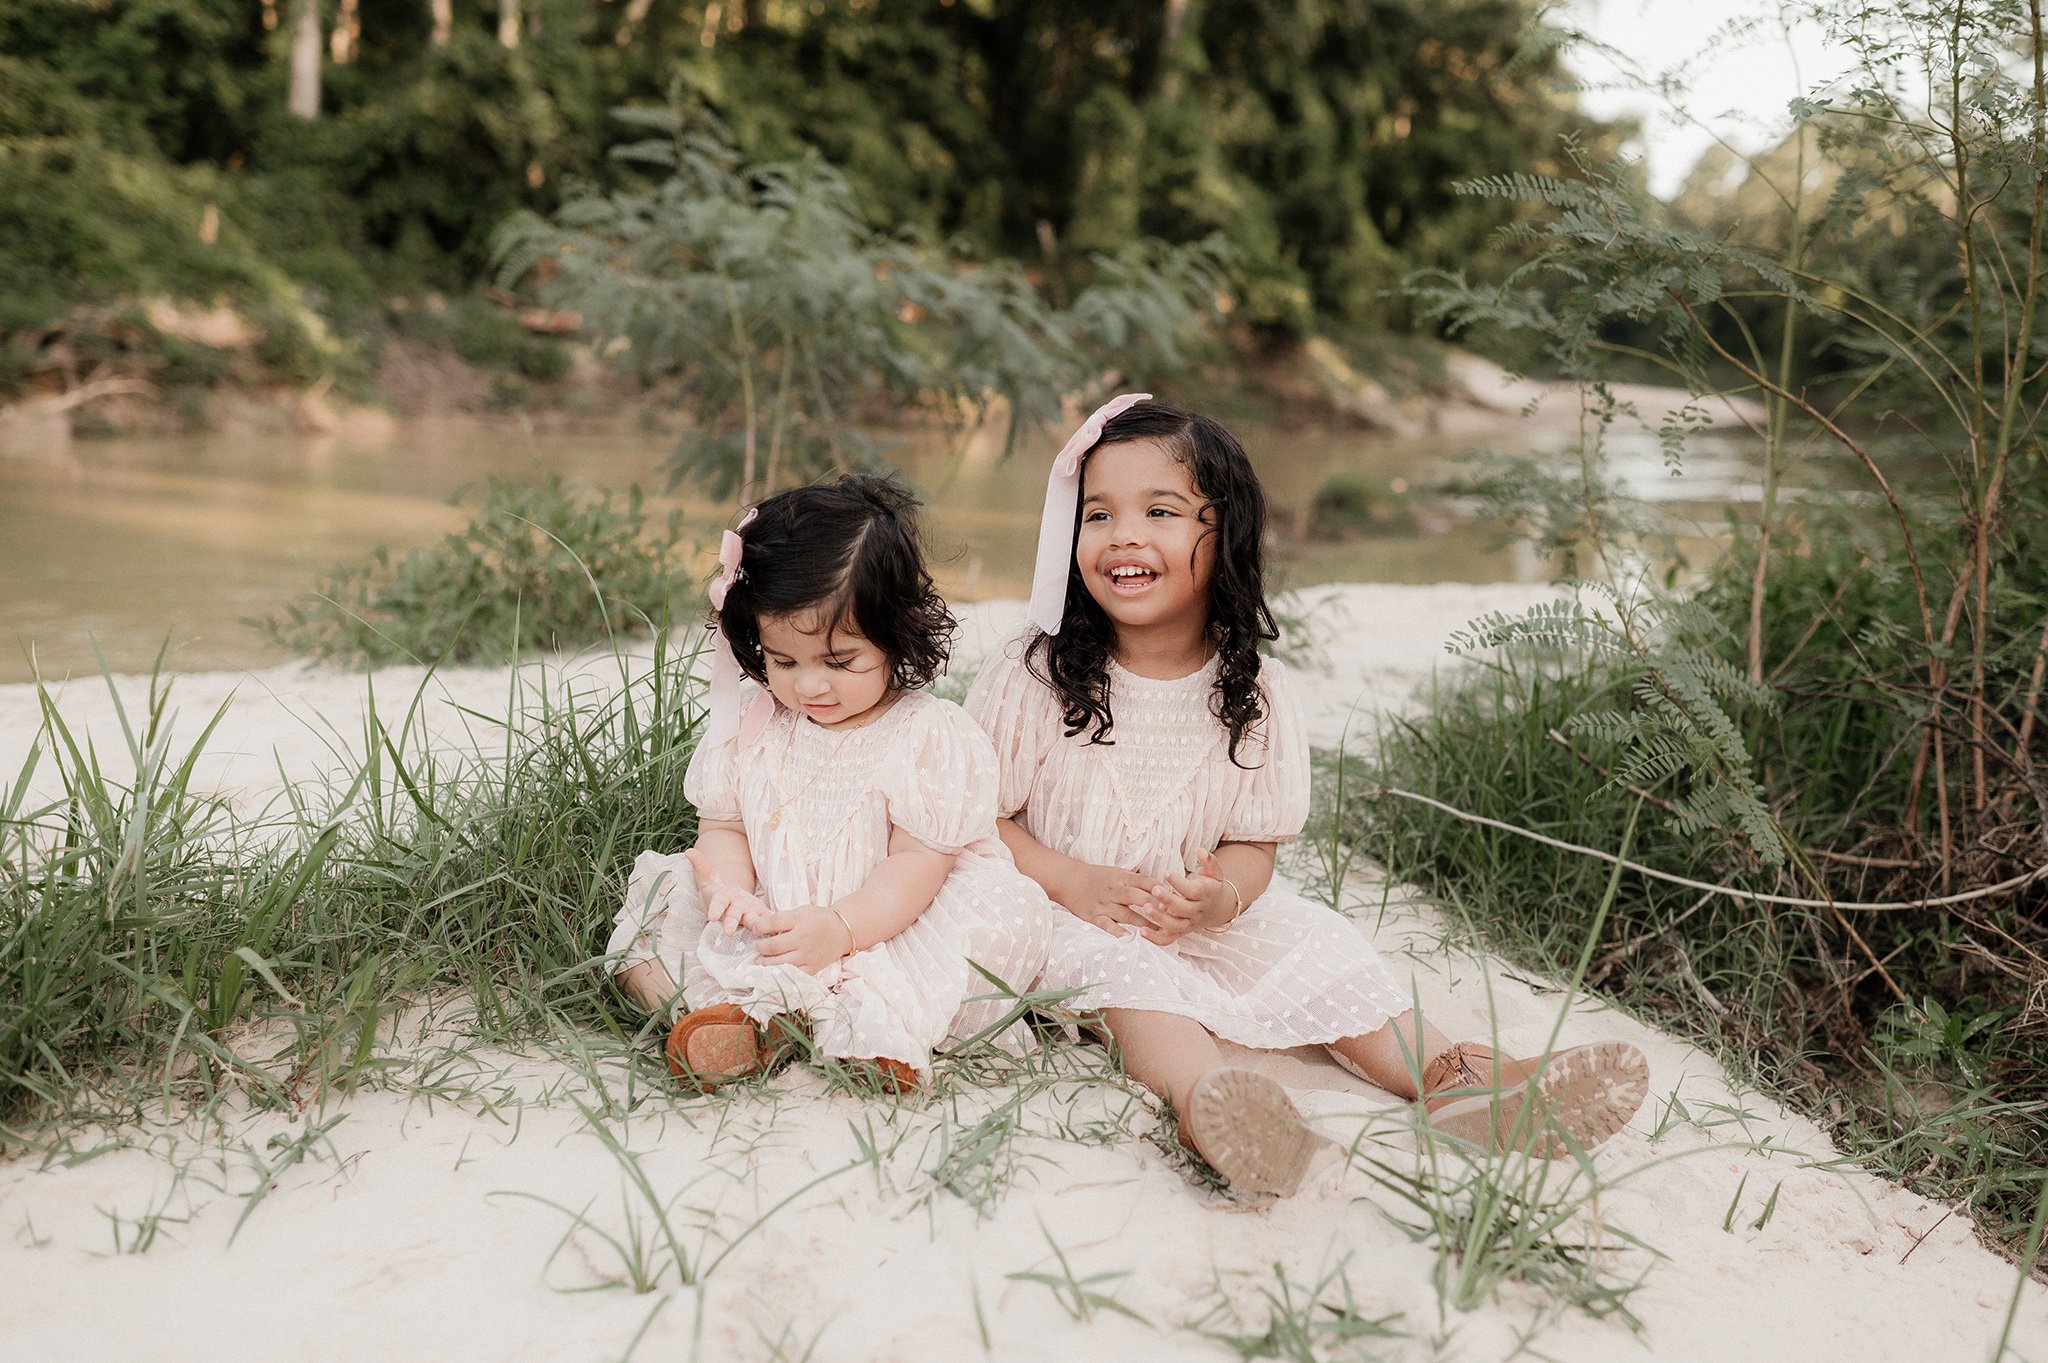 the woodlands family photographer _ conroe photographer _ houston family photographer _ ashley gillen photography _ texas family photographer _ conroe wedding photographer _ conroe texas _ cshi31.jpg